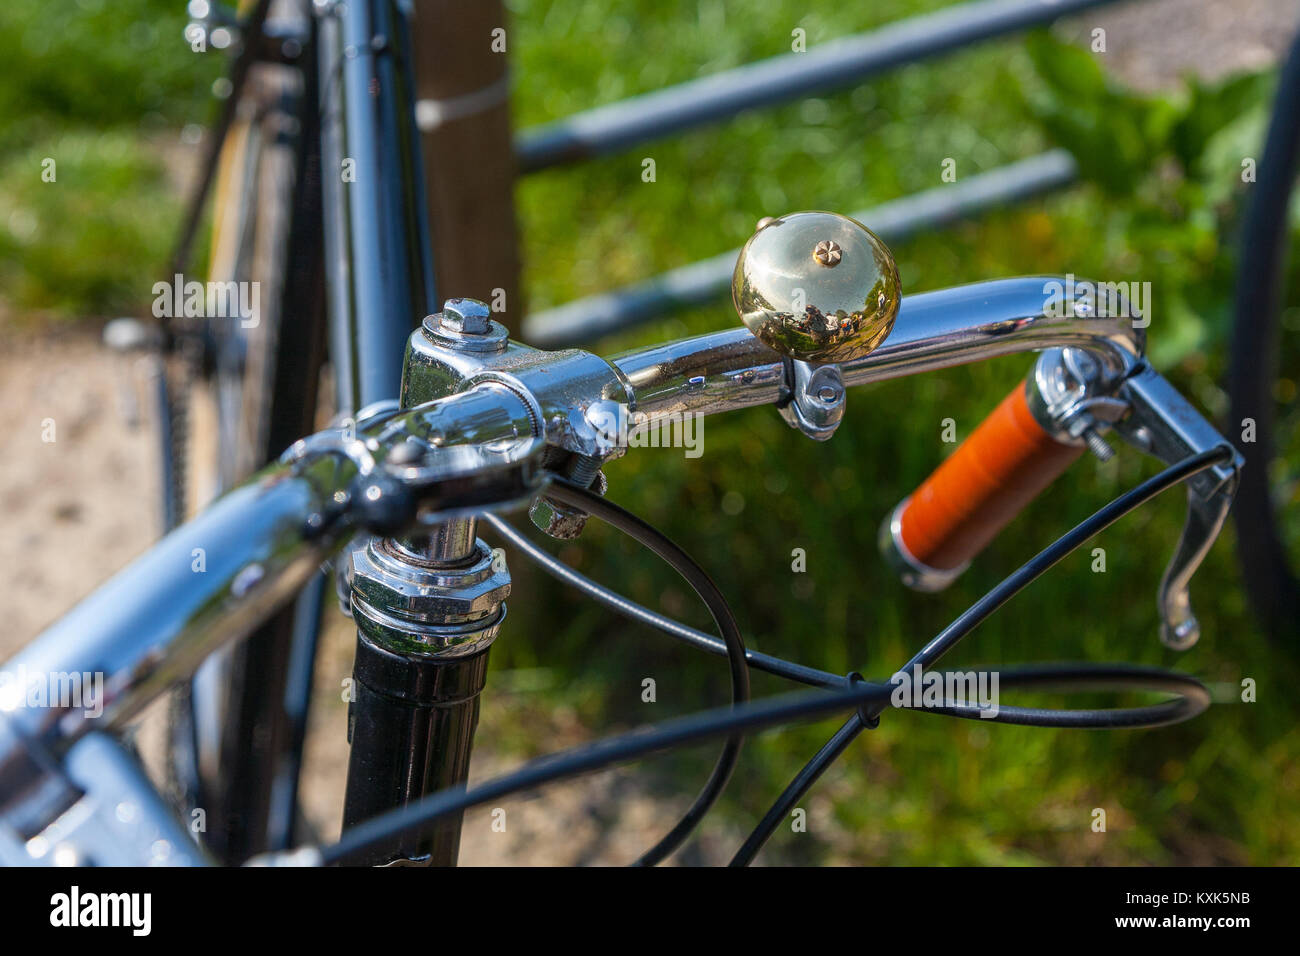 A close-up of a vintage bicycle chrome handle bars with a polished bell Stock Photo